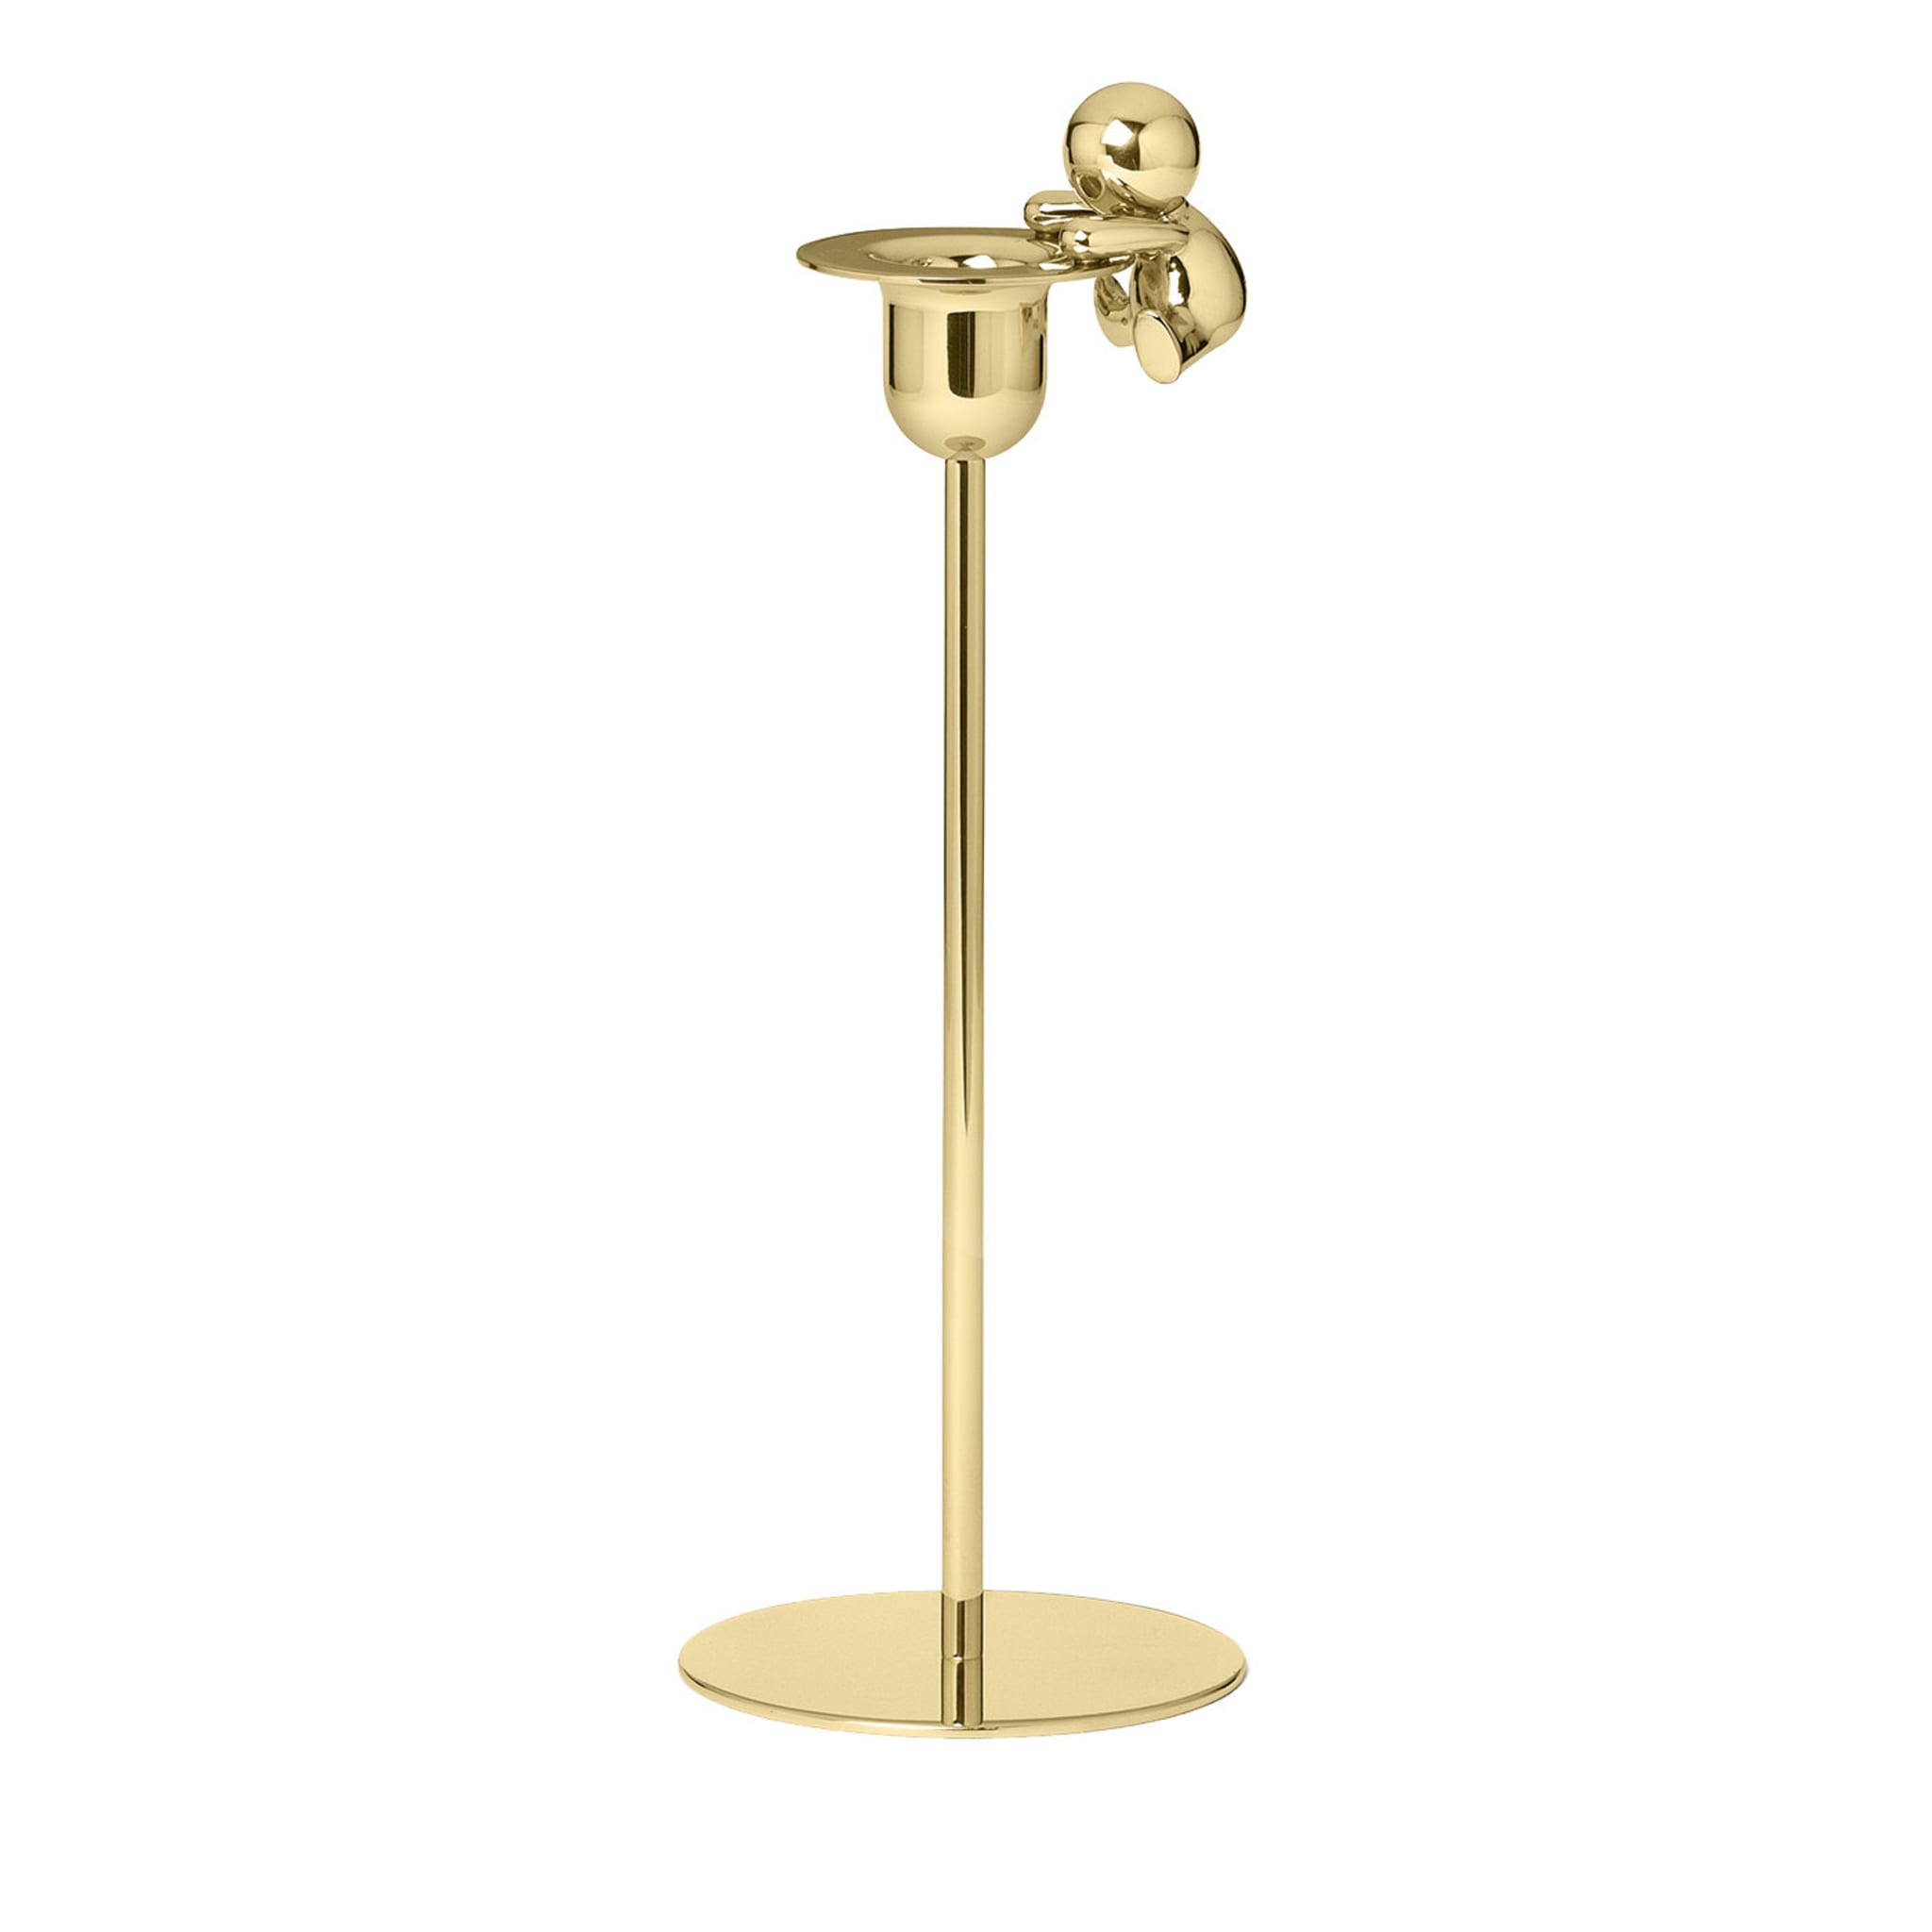 Omini Climber Tall Candlestick in Polished Brass By Stefano Giovannoni - Main view